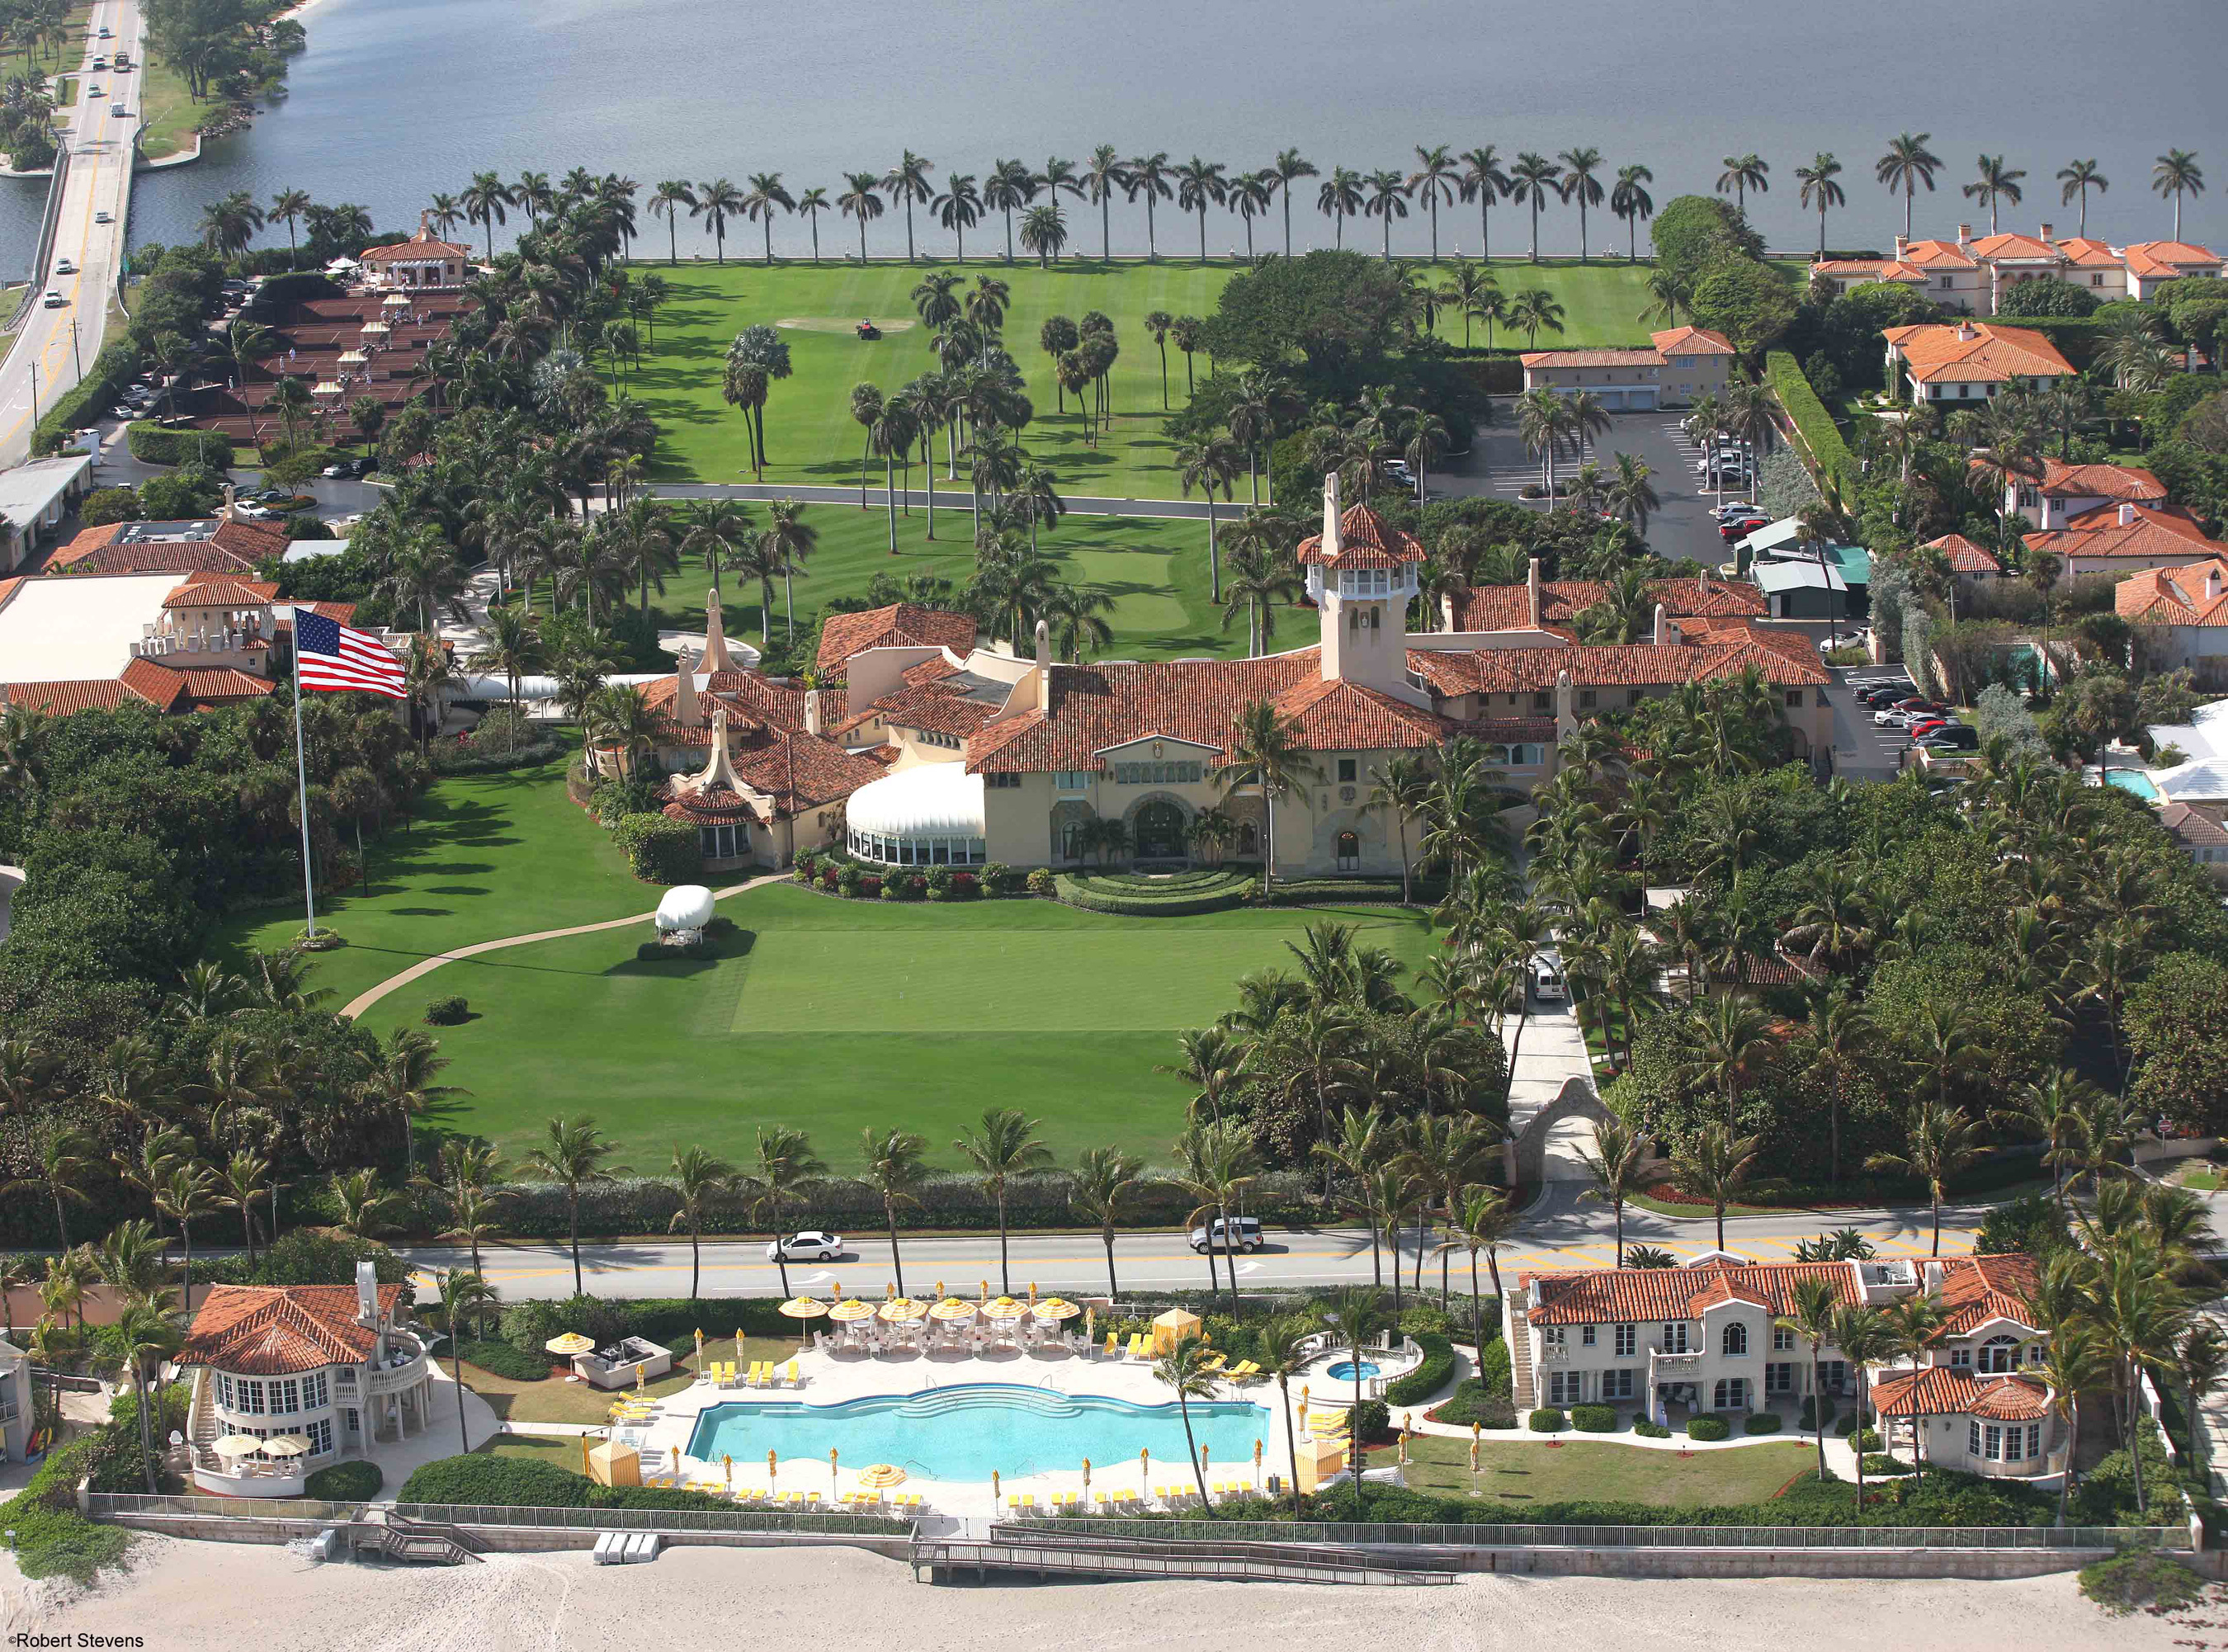 How Much Does It Cost to Mow the Lawn at Donald Trump's ...